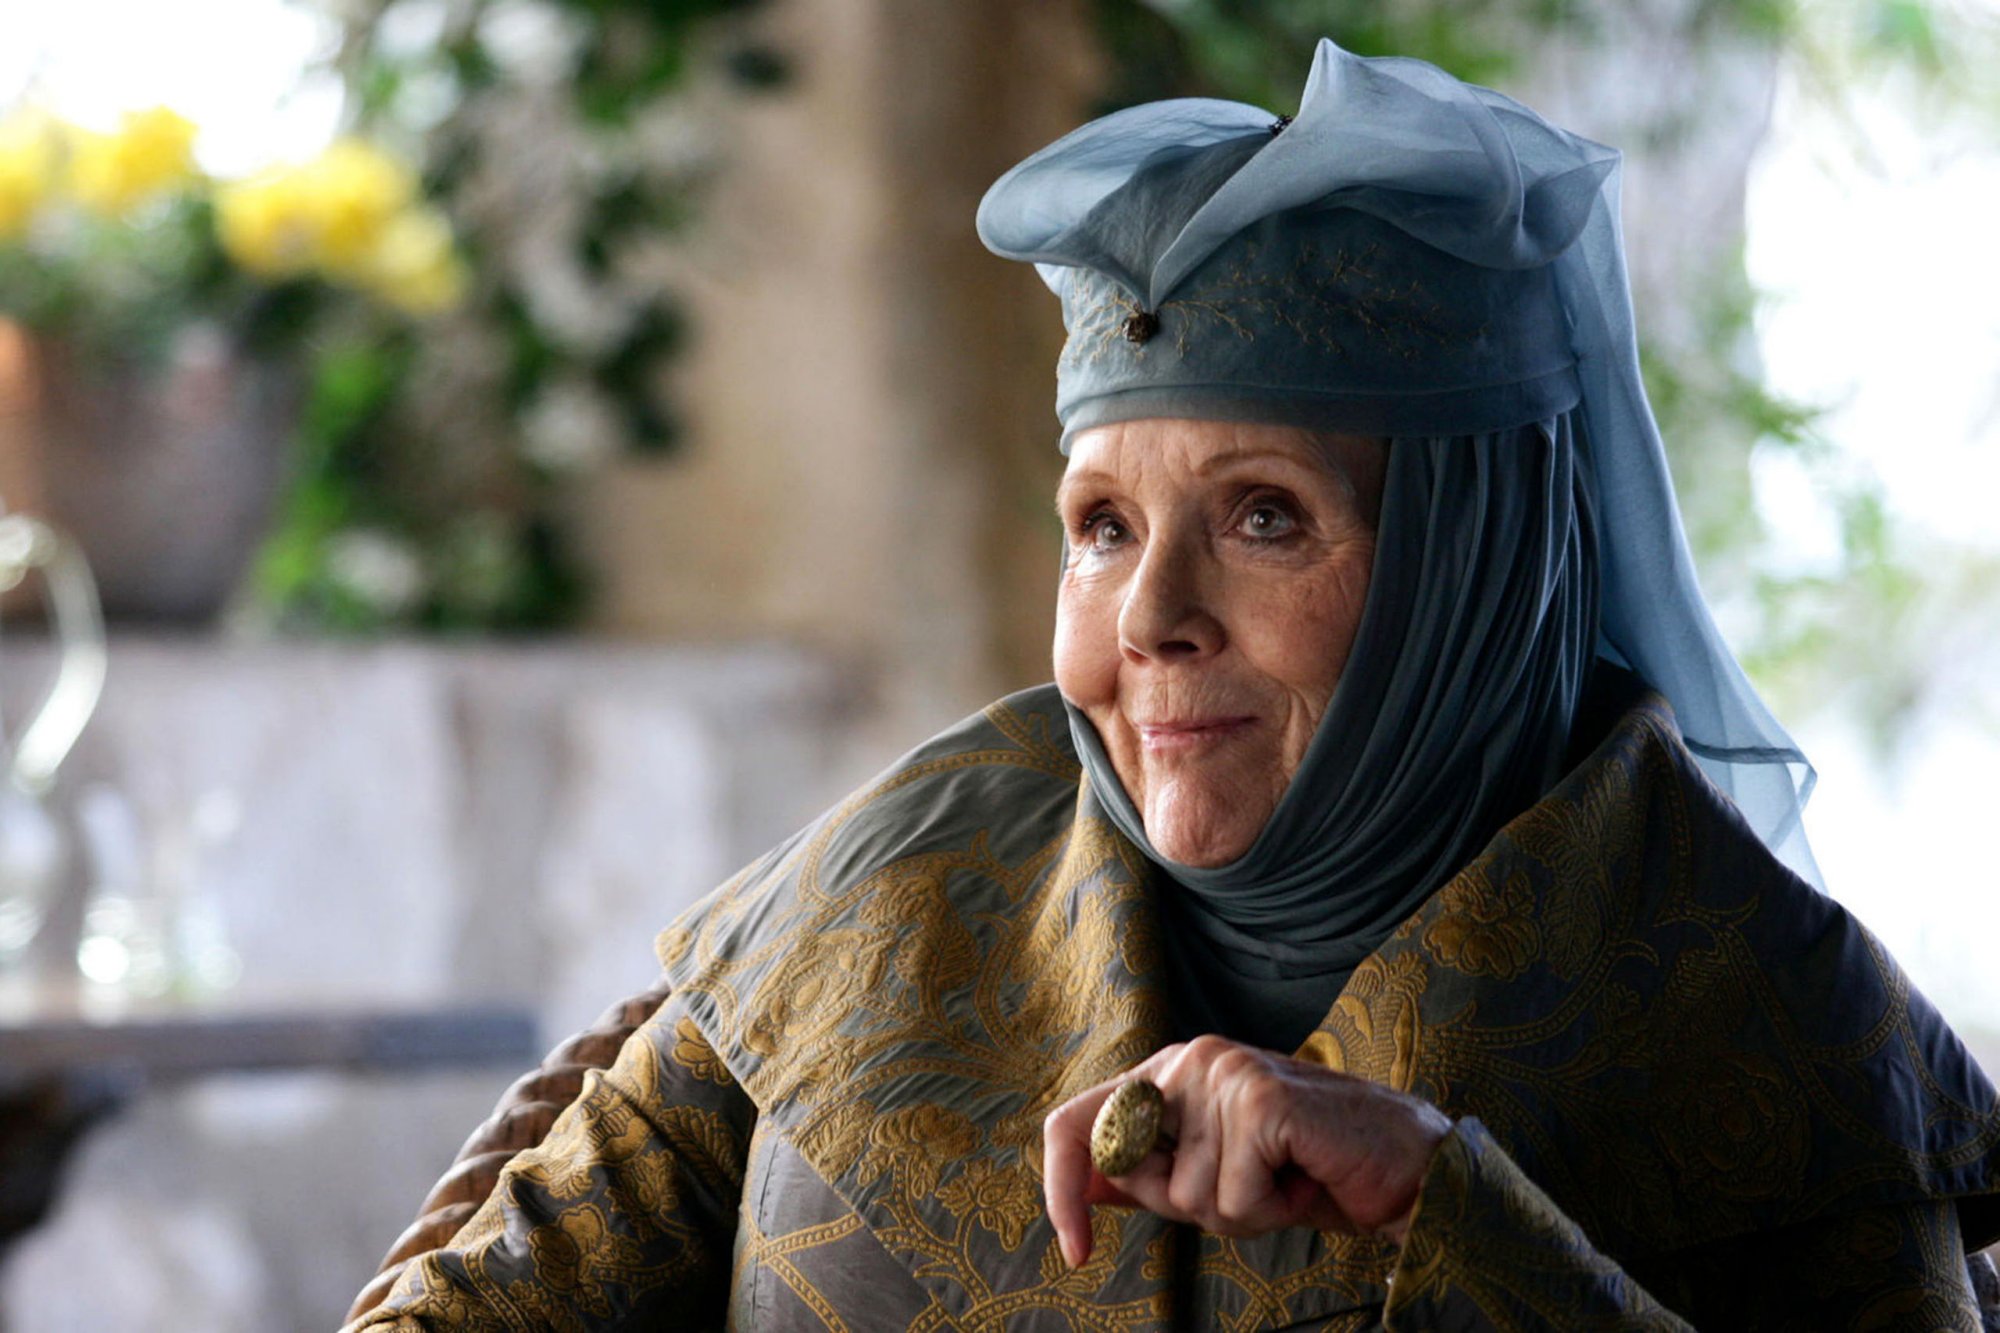 You probably know this is Olenna Tyrell from Game of Thrones.